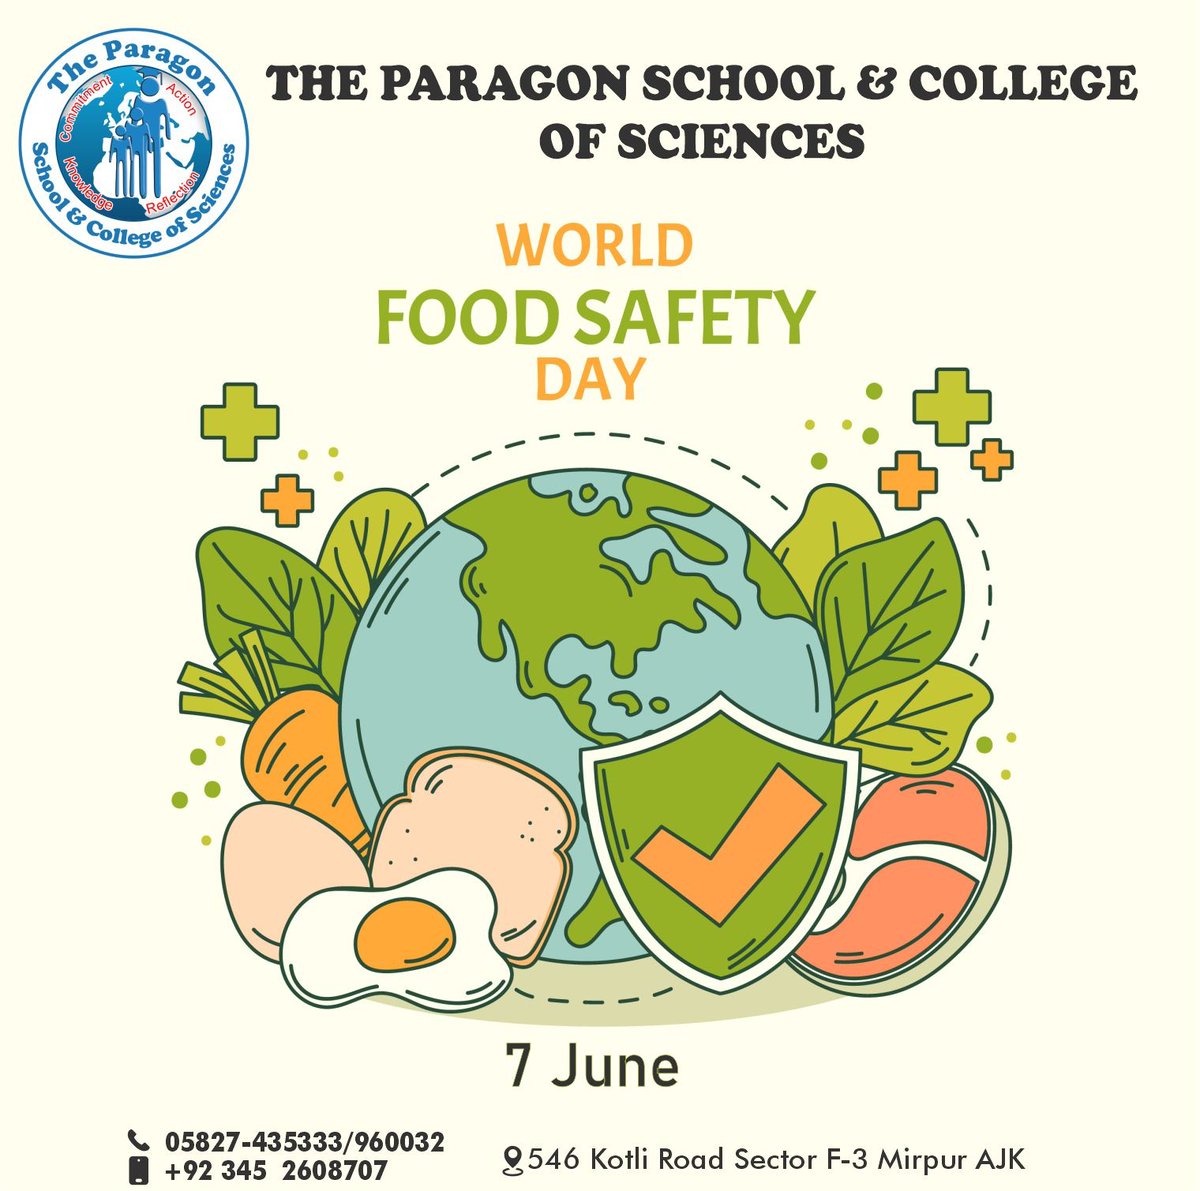 Happy World Food Safety Day! Let's prioritize safe and healthy food practices for a better tomorrow. From farm to fork, let's ensure food safety at every step. Together, we can protect our health and well-being. 🍽️✨ #WorldFoodSafetyDay #SafeFoodForAll